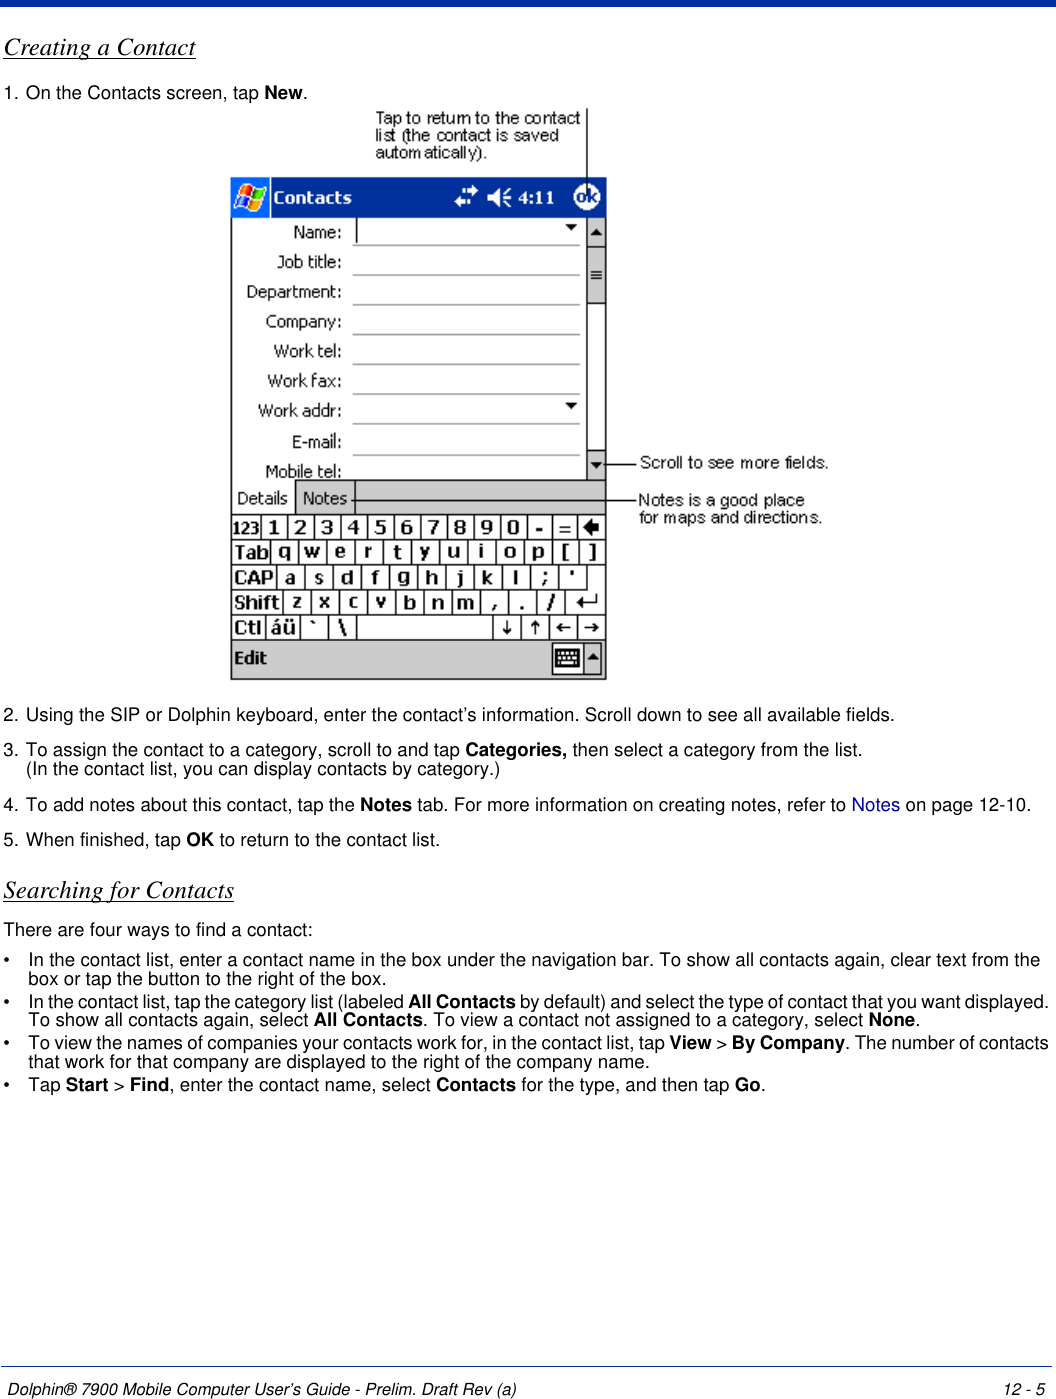 Dolphin® 7900 Mobile Computer User’s Guide - Prelim. Draft Rev (a) 12 - 5Creating a Contact1. On the Contacts screen, tap New.2. Using the SIP or Dolphin keyboard, enter the contact’s information. Scroll down to see all available fields.3. To assign the contact to a category, scroll to and tap Categories, then select a category from the list.  (In the contact list, you can display contacts by category.)4. To add notes about this contact, tap the Notes tab. For more information on creating notes, refer to Notes on page 12-10.5. When finished, tap OK to return to the contact list.Searching for ContactsThere are four ways to find a contact: •           In the contact list, enter a contact name in the box under the navigation bar. To show all contacts again, clear text from the box or tap the button to the right of the box. •           In the contact list, tap the category list (labeled All Contacts by default) and select the type of contact that you want displayed. To show all contacts again, select All Contacts. To view a contact not assigned to a category, select None. •           To view the names of companies your contacts work for, in the contact list, tap View &gt; By Company. The number of contacts that work for that company are displayed to the right of the company name. •           Tap Start &gt; Find, enter the contact name, select Contacts for the type, and then tap Go. 